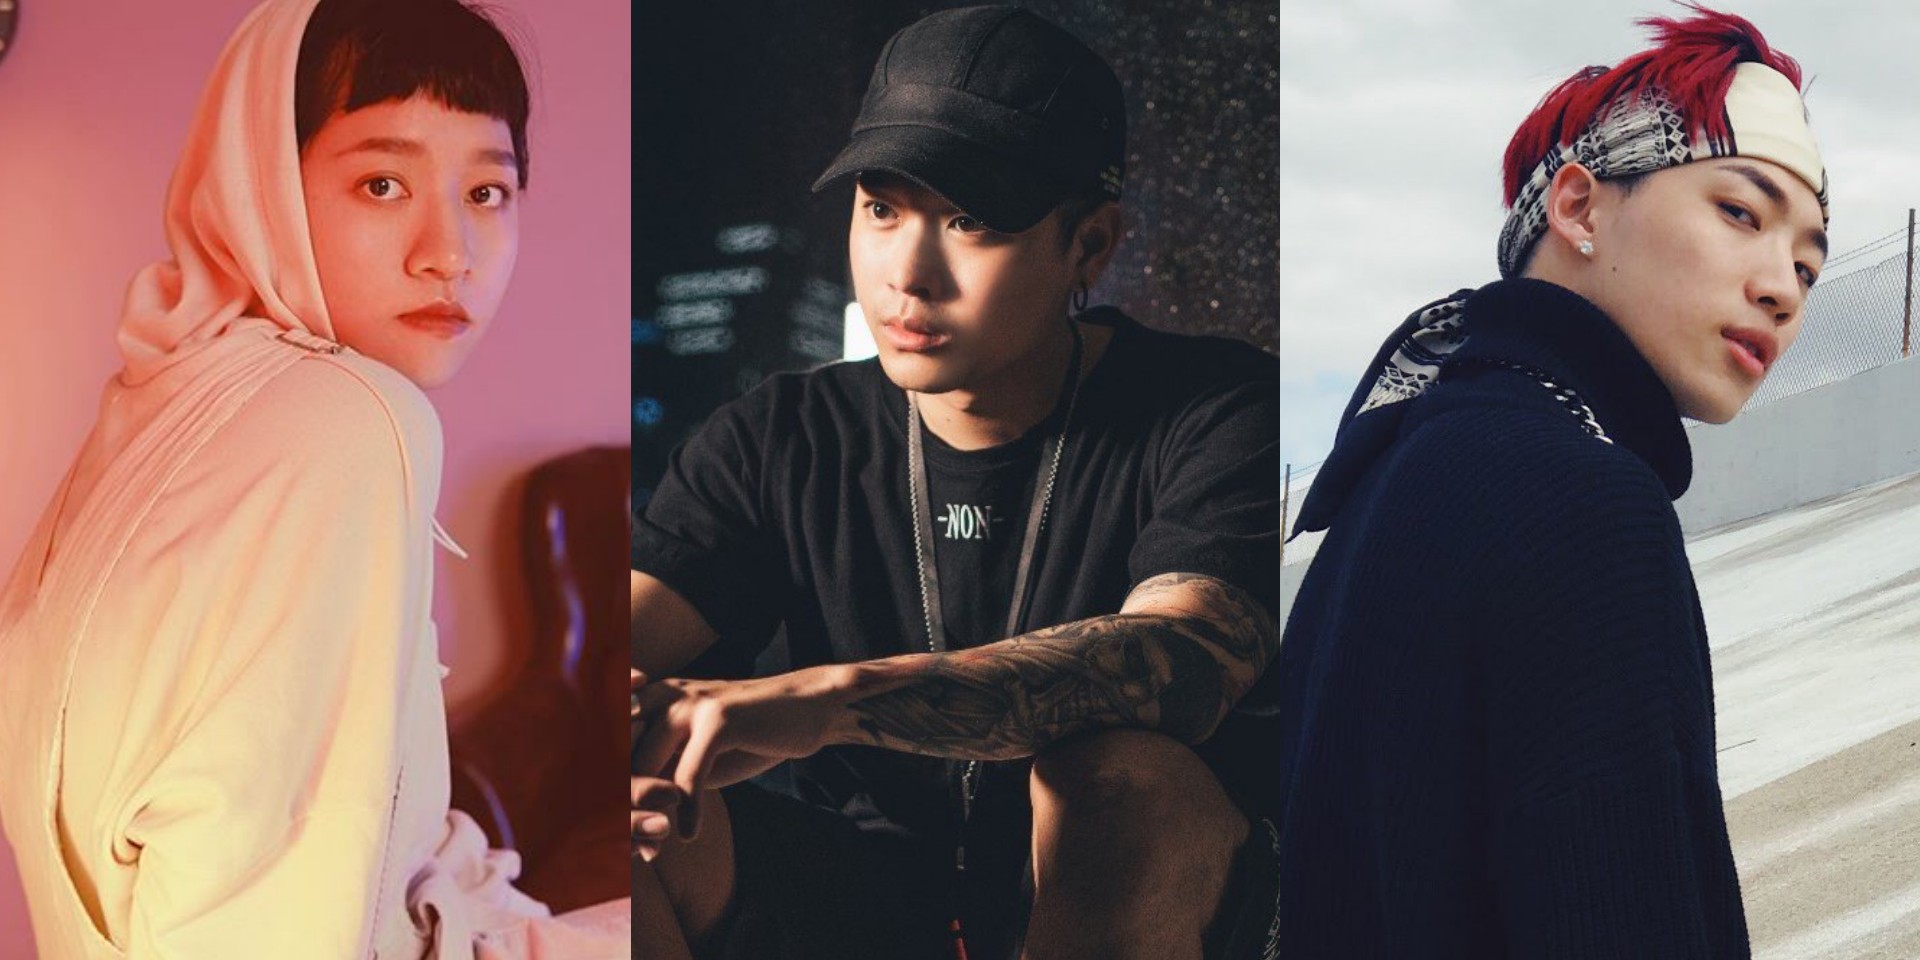 The Next Wave of Taiwanese Hip-Hop Artists